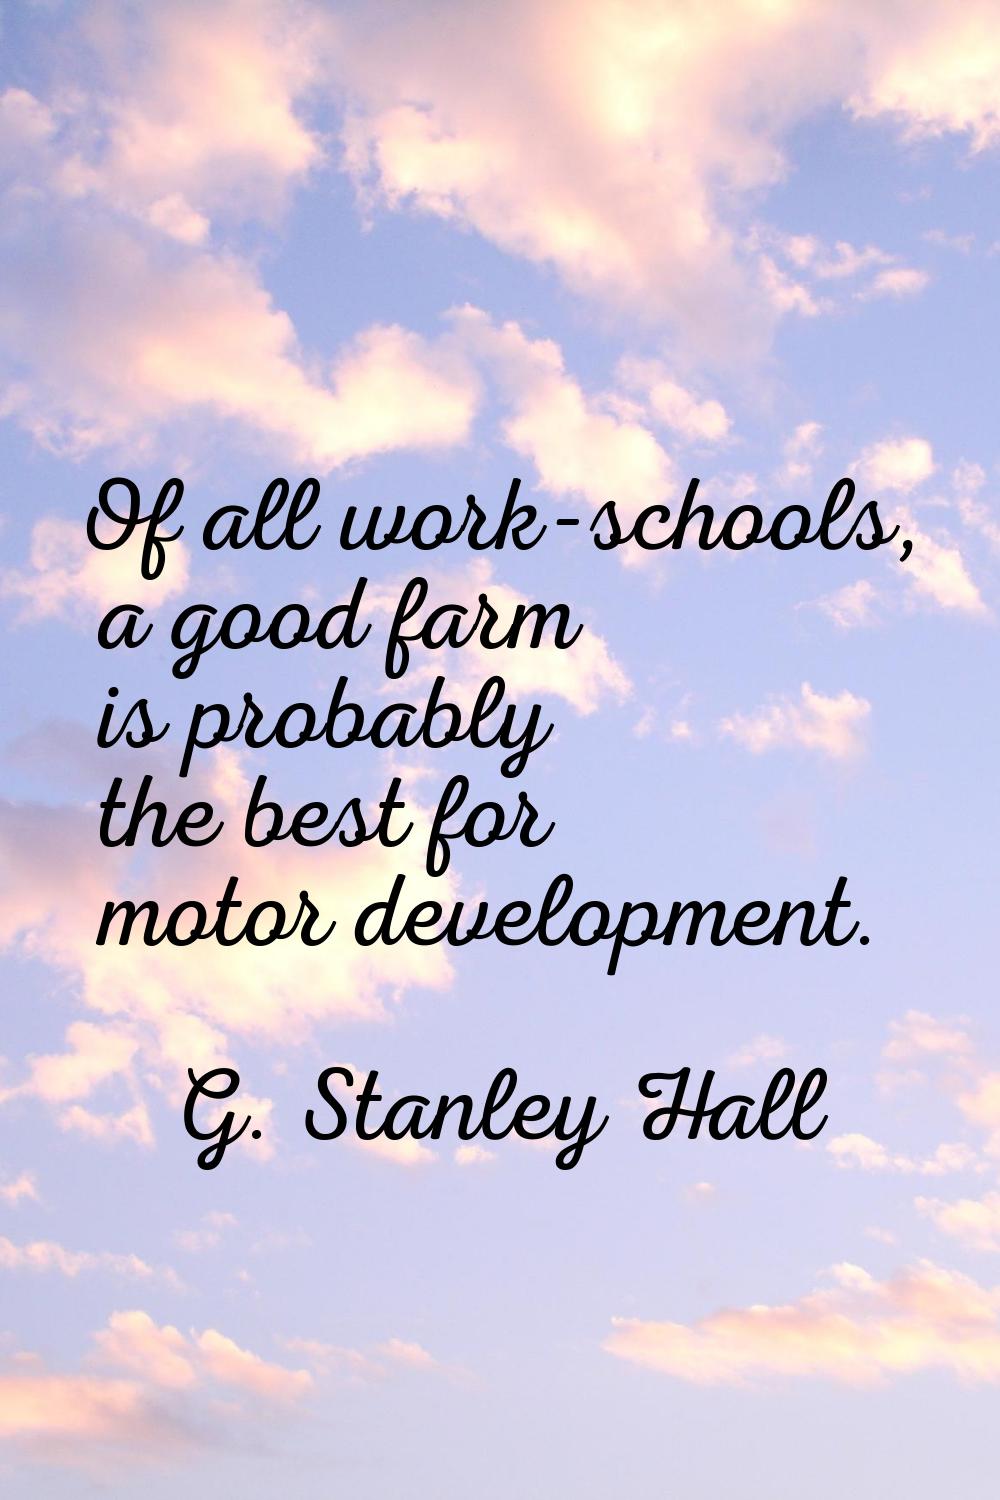 Of all work-schools, a good farm is probably the best for motor development.